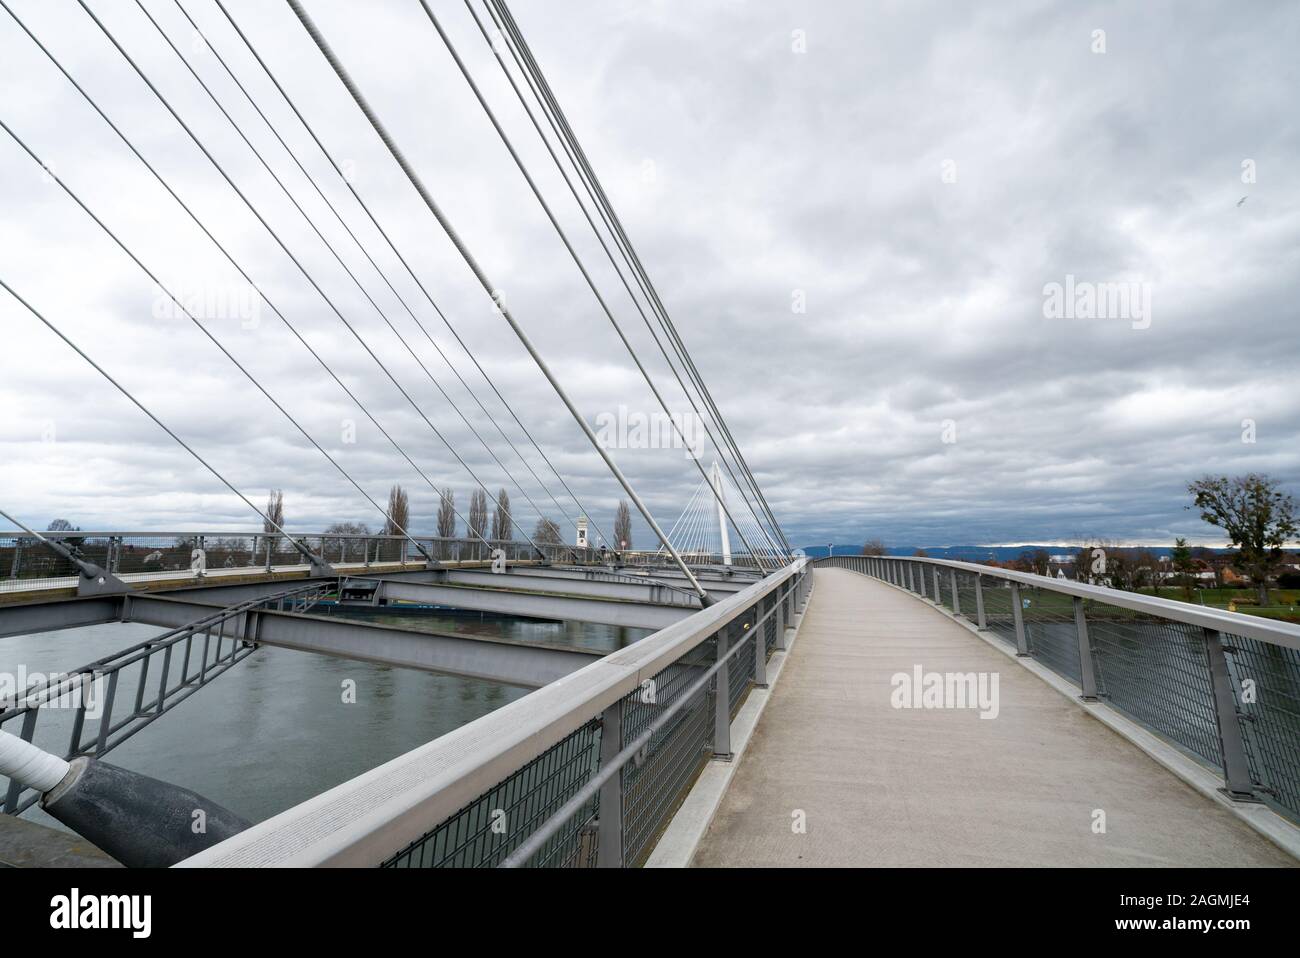 A view of the Passerelle des Deux Rives Bridge over the Rhine River outside of Strasbourg Stock Photo